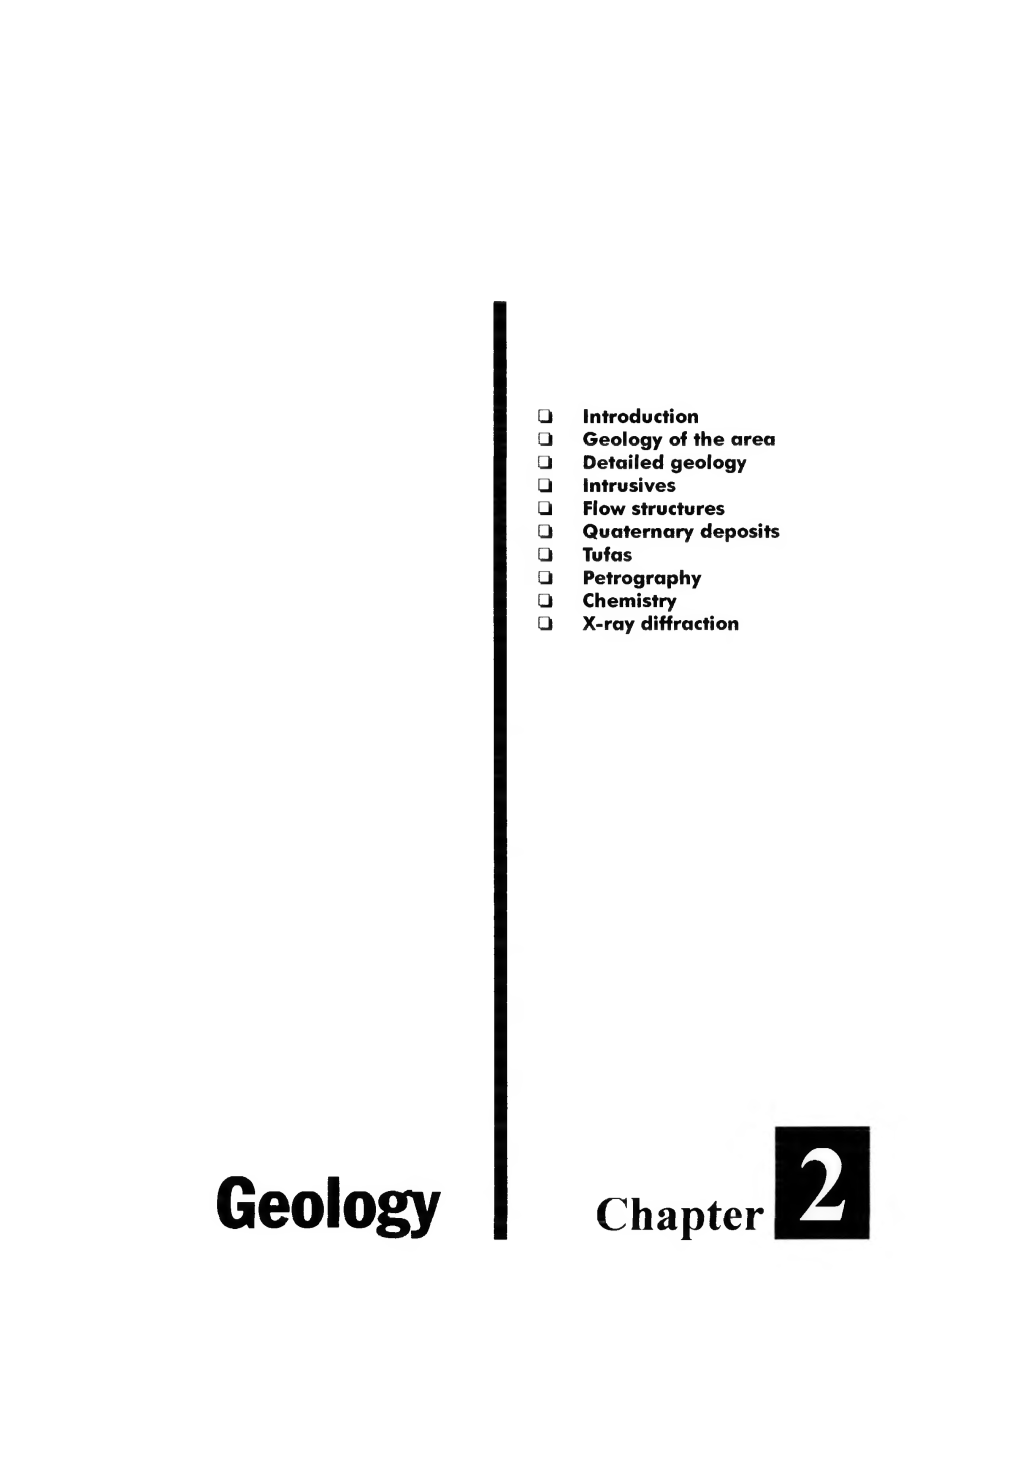 Geology of the Area □ Detailed Geology □ Intrusives □ Flow Structures □ Quaternary Deposits □ Tufas □ Petrography □ Chemistry □ X-Ray Diffraction